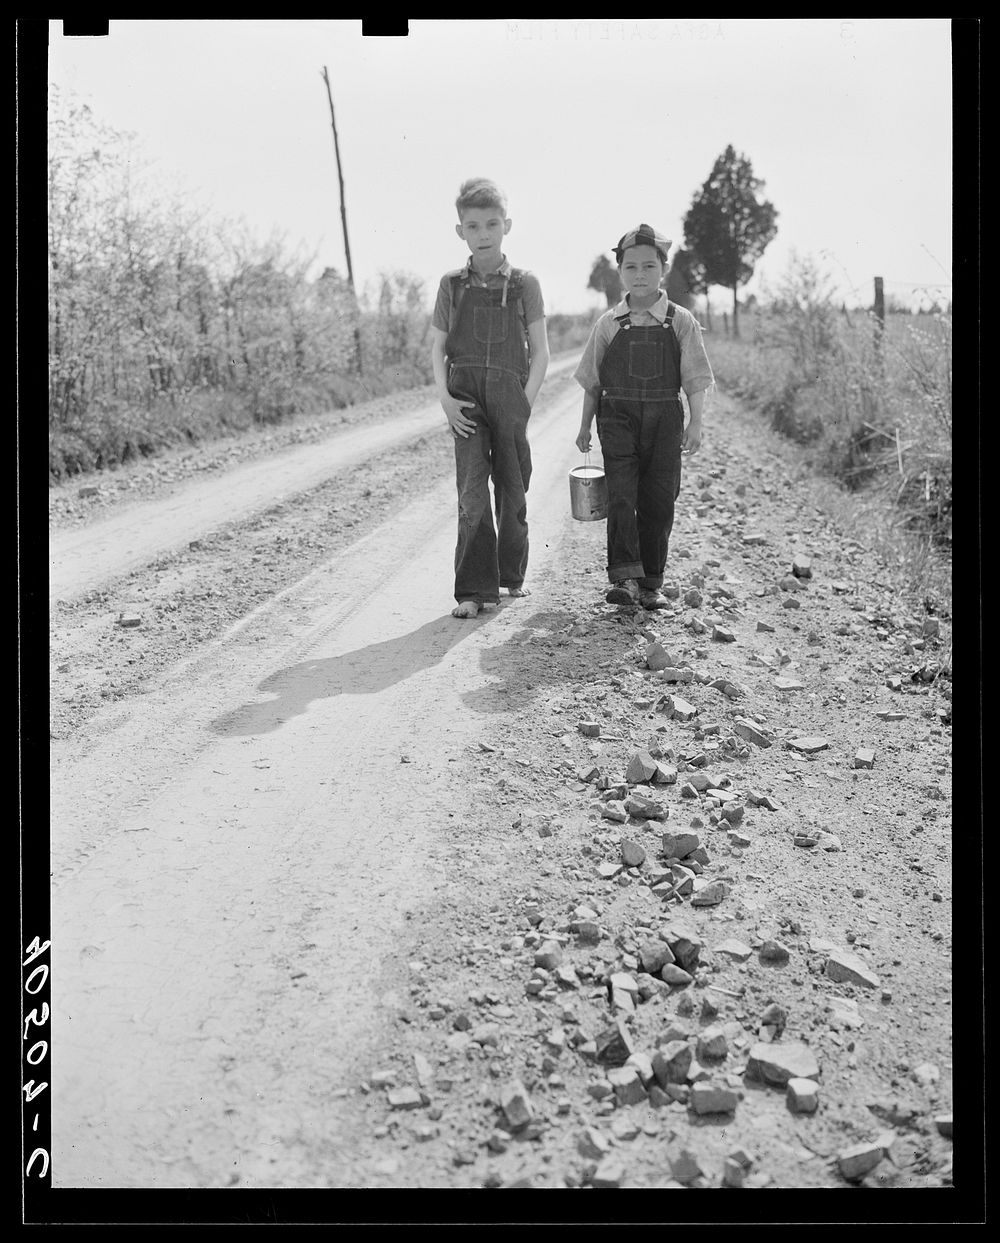 Boys on way home from school. Near Sterling, Virgina. Sourced from the Library of Congress.